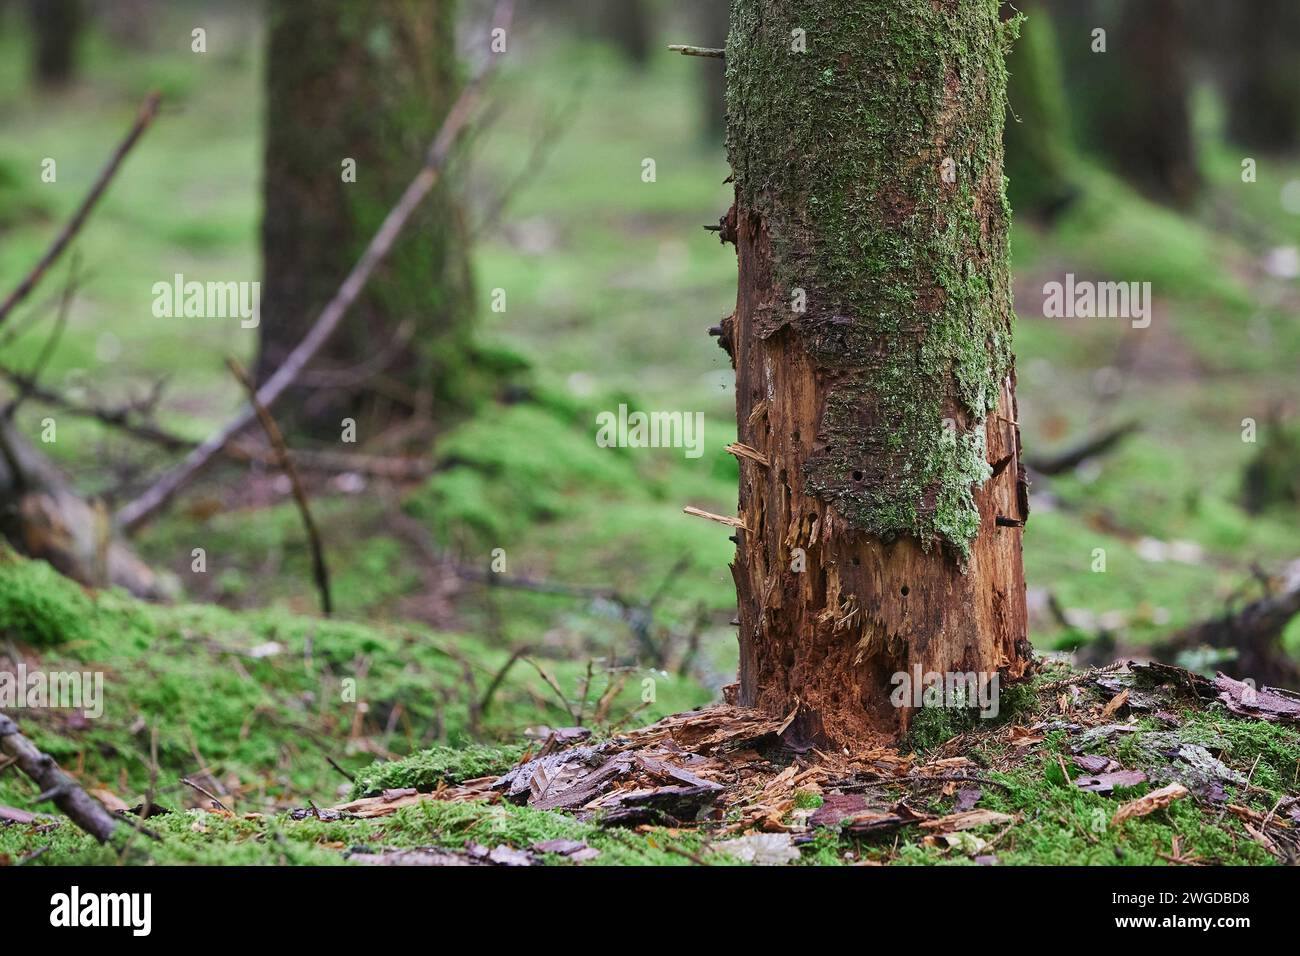 A tree killed by parasites in a forest in Denmark Stock Photo